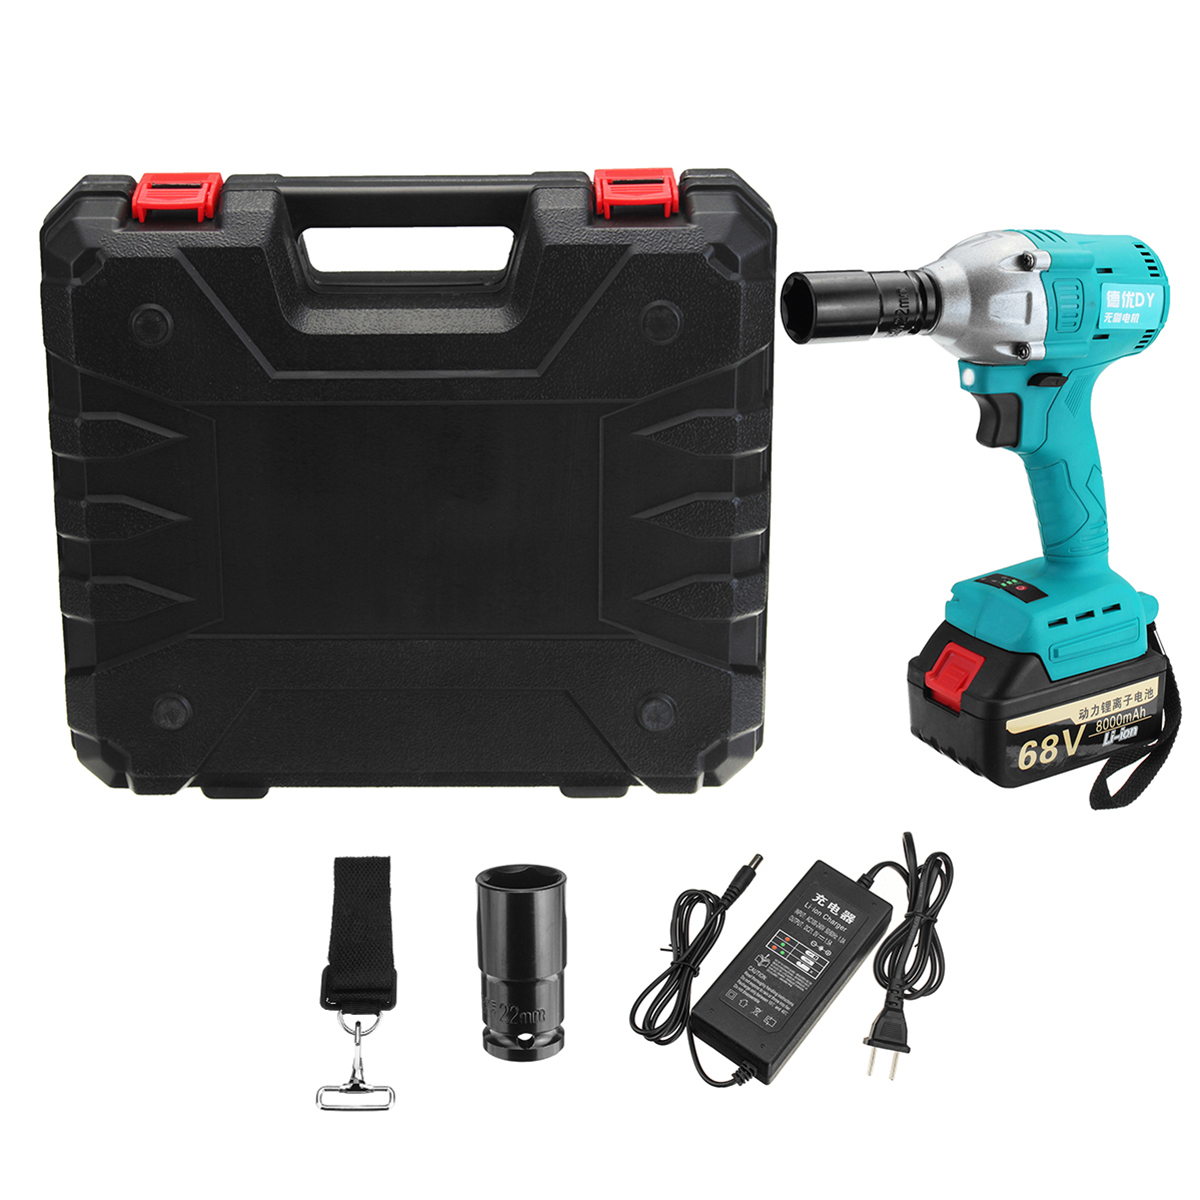 68V-8000mAh-Electric-Brushless-Cordless-Impact-Wrench-Reparing-Tools-Kit-with-Li-Ion-Battery-Charger-1592147-3